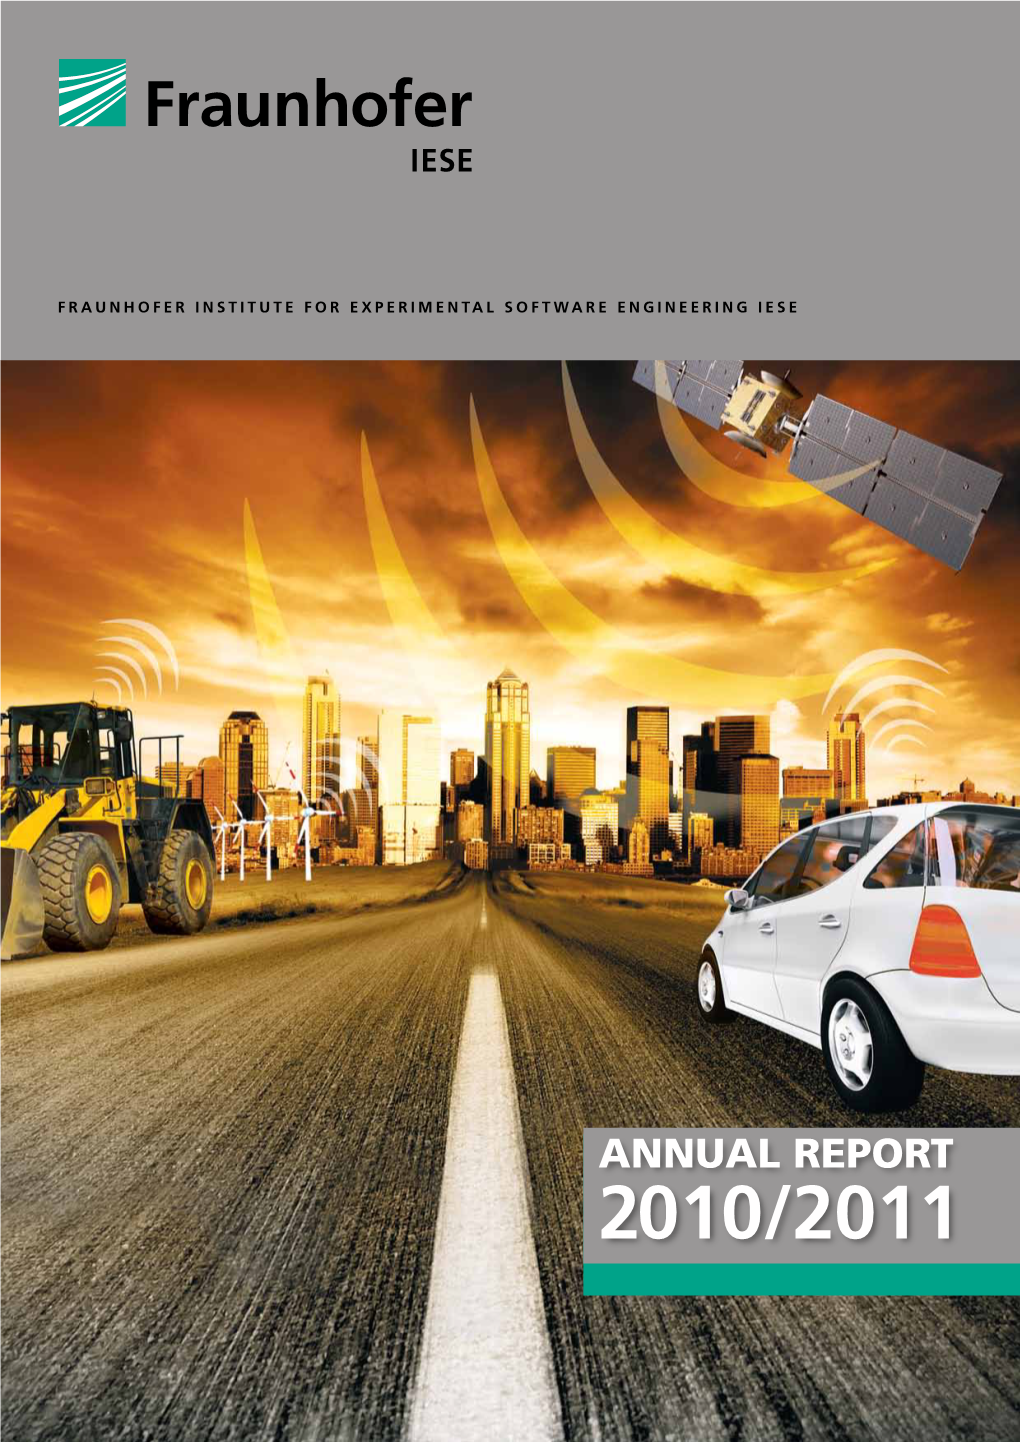 More on 2010 in the Annual Report